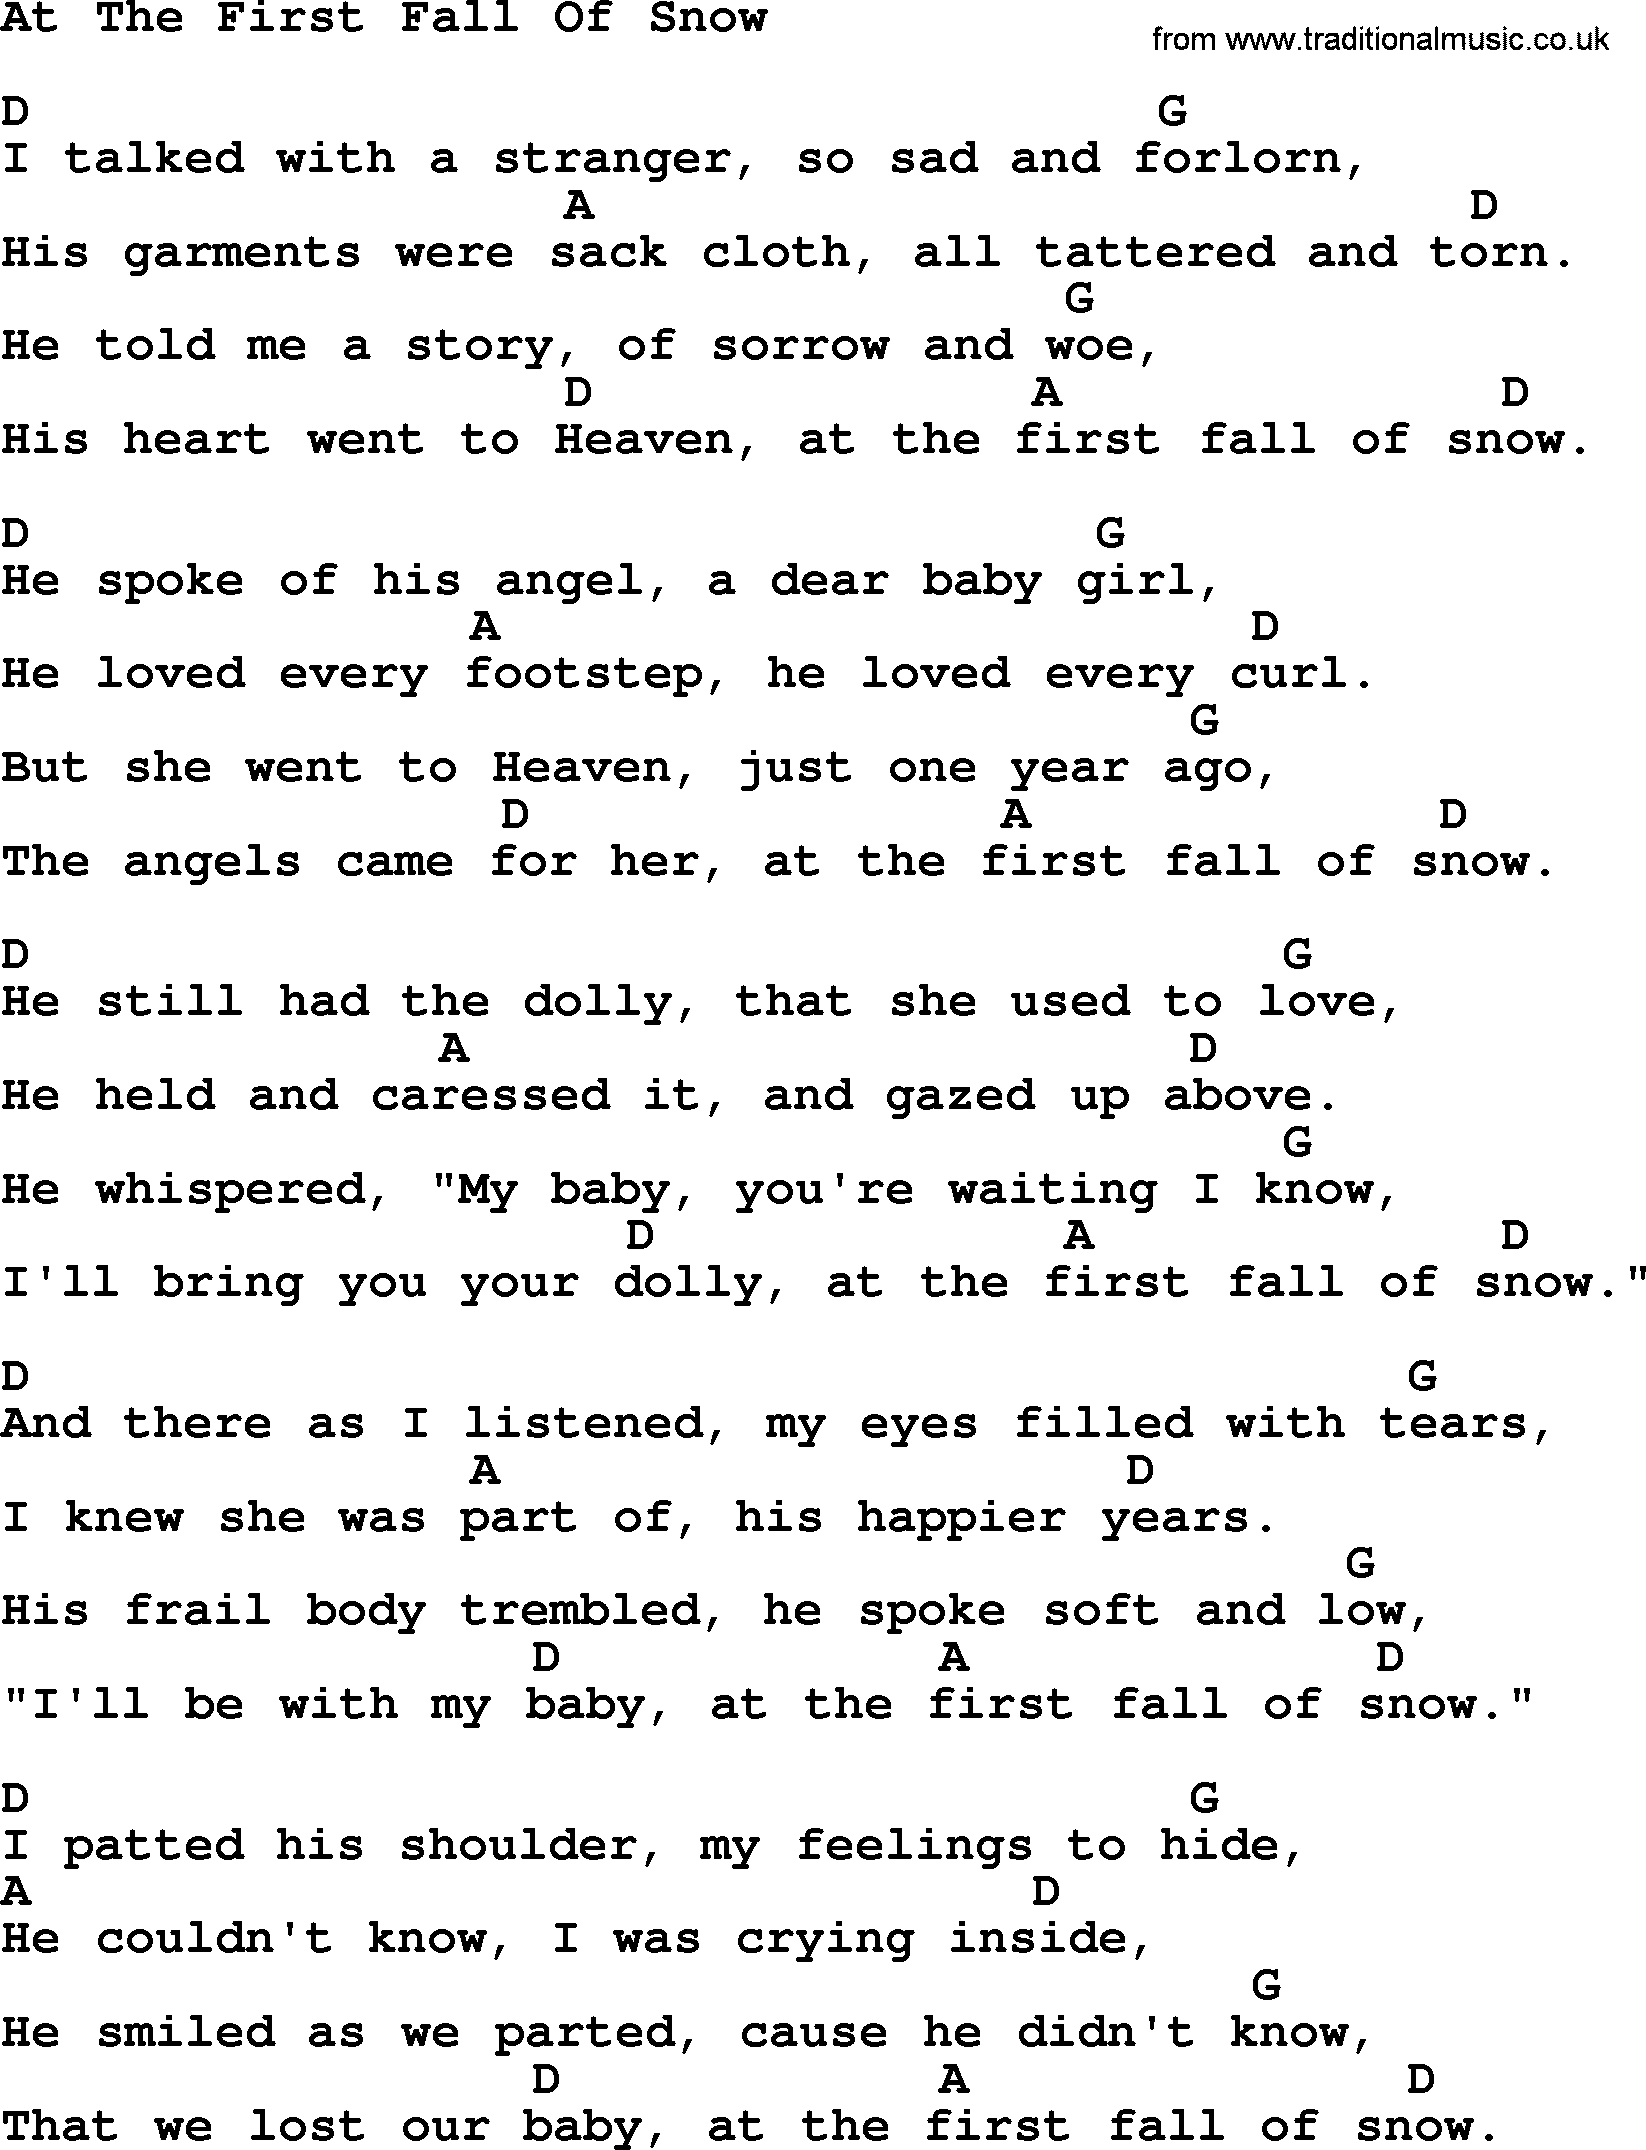 Hank Williams song At The First Fall Of Snow, lyrics and chords